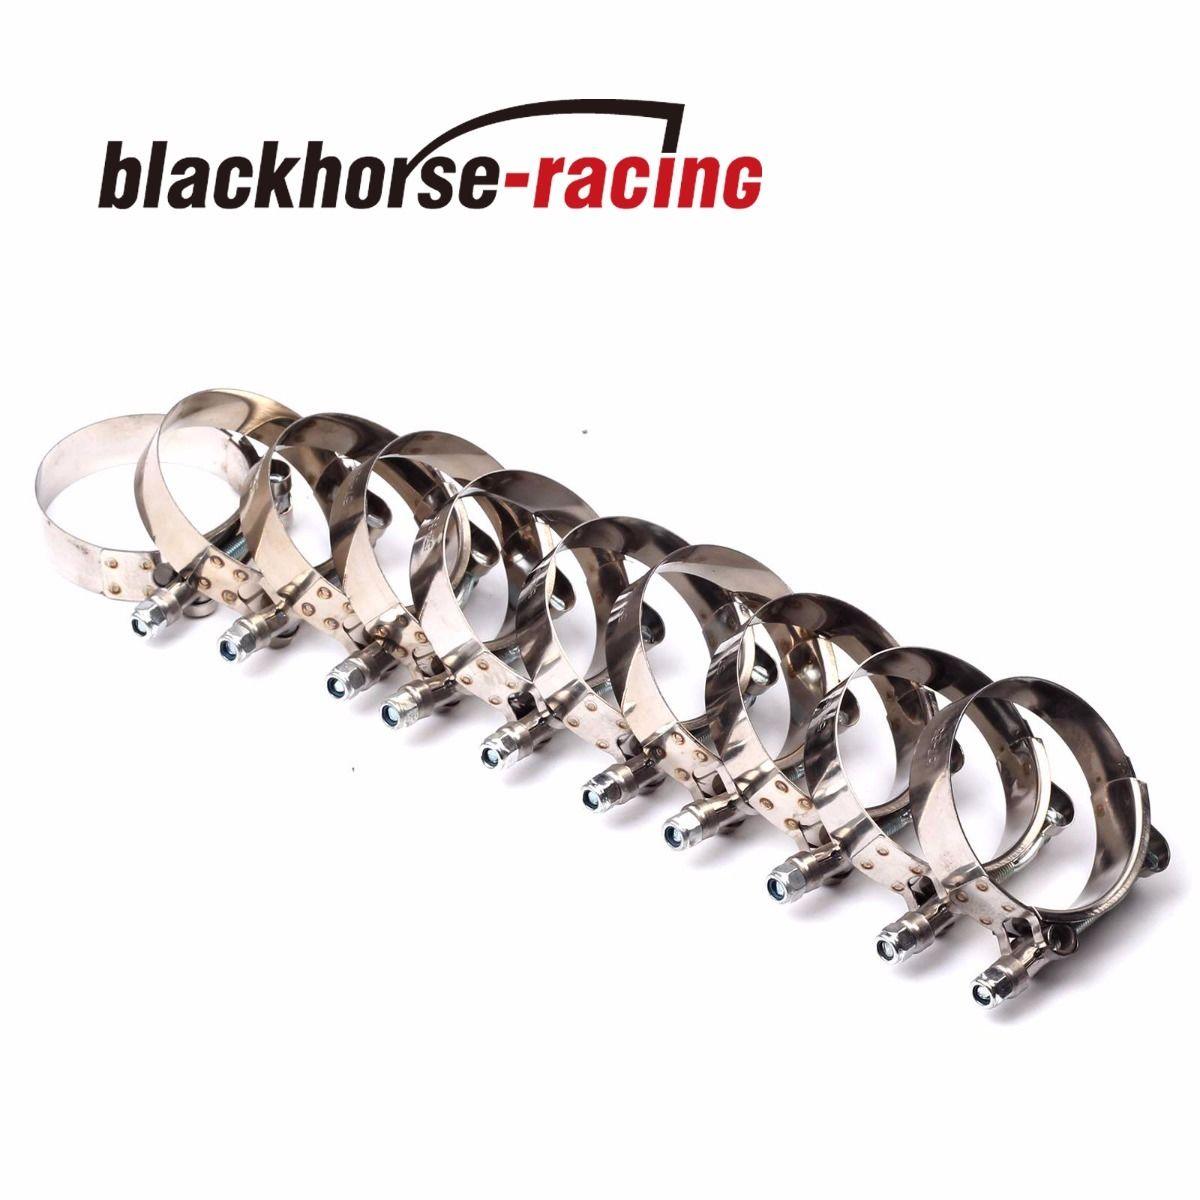 10PCS 6''(6.26''-6.57'') 301 Stainless Steel T Bolt Clamps Clamp 159mm-167mm - www.blackhorse-racing.com